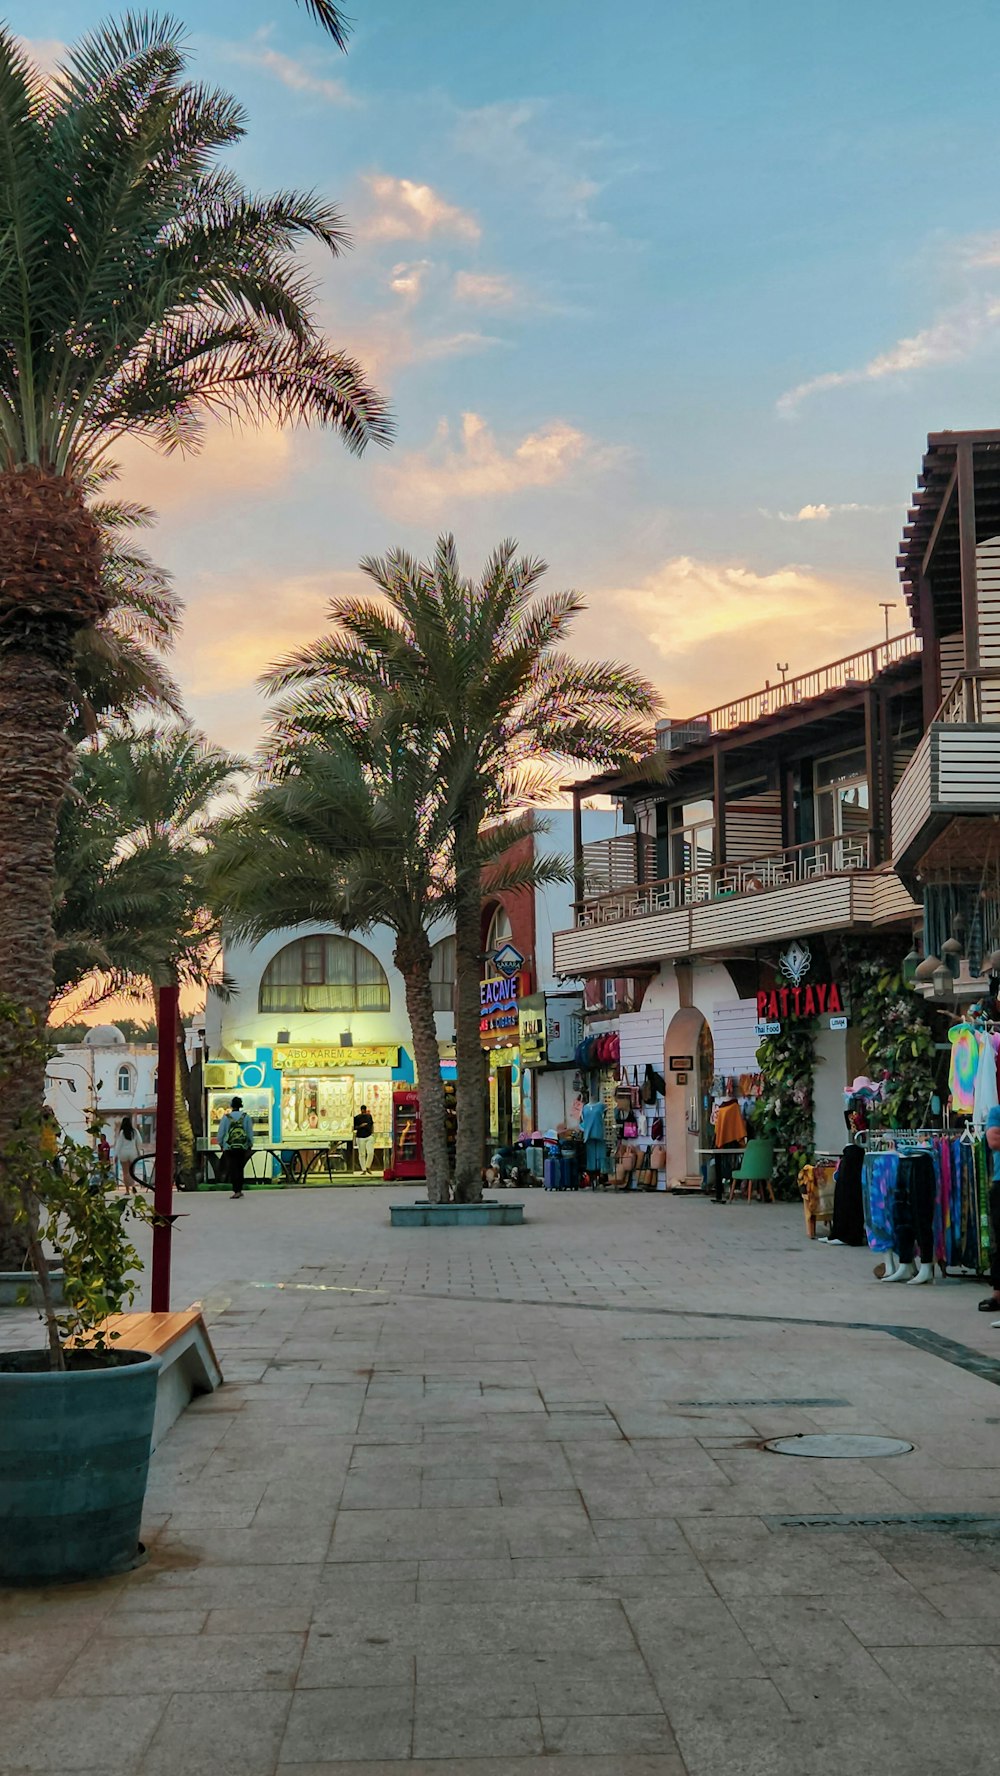 a street with palm trees and shops in the background